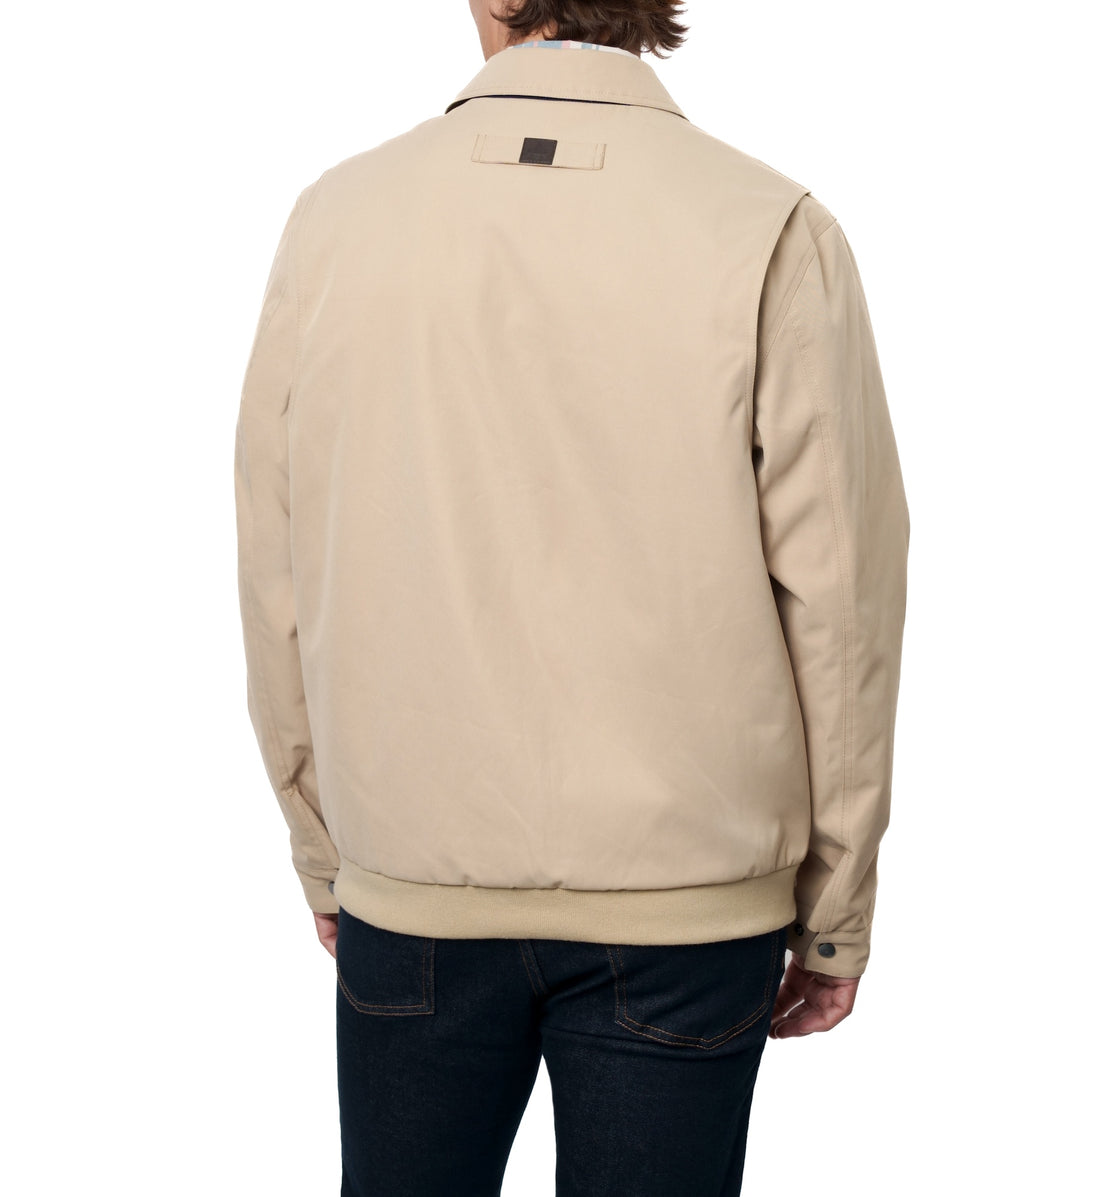 The DISTANCE BOMBER JACKET